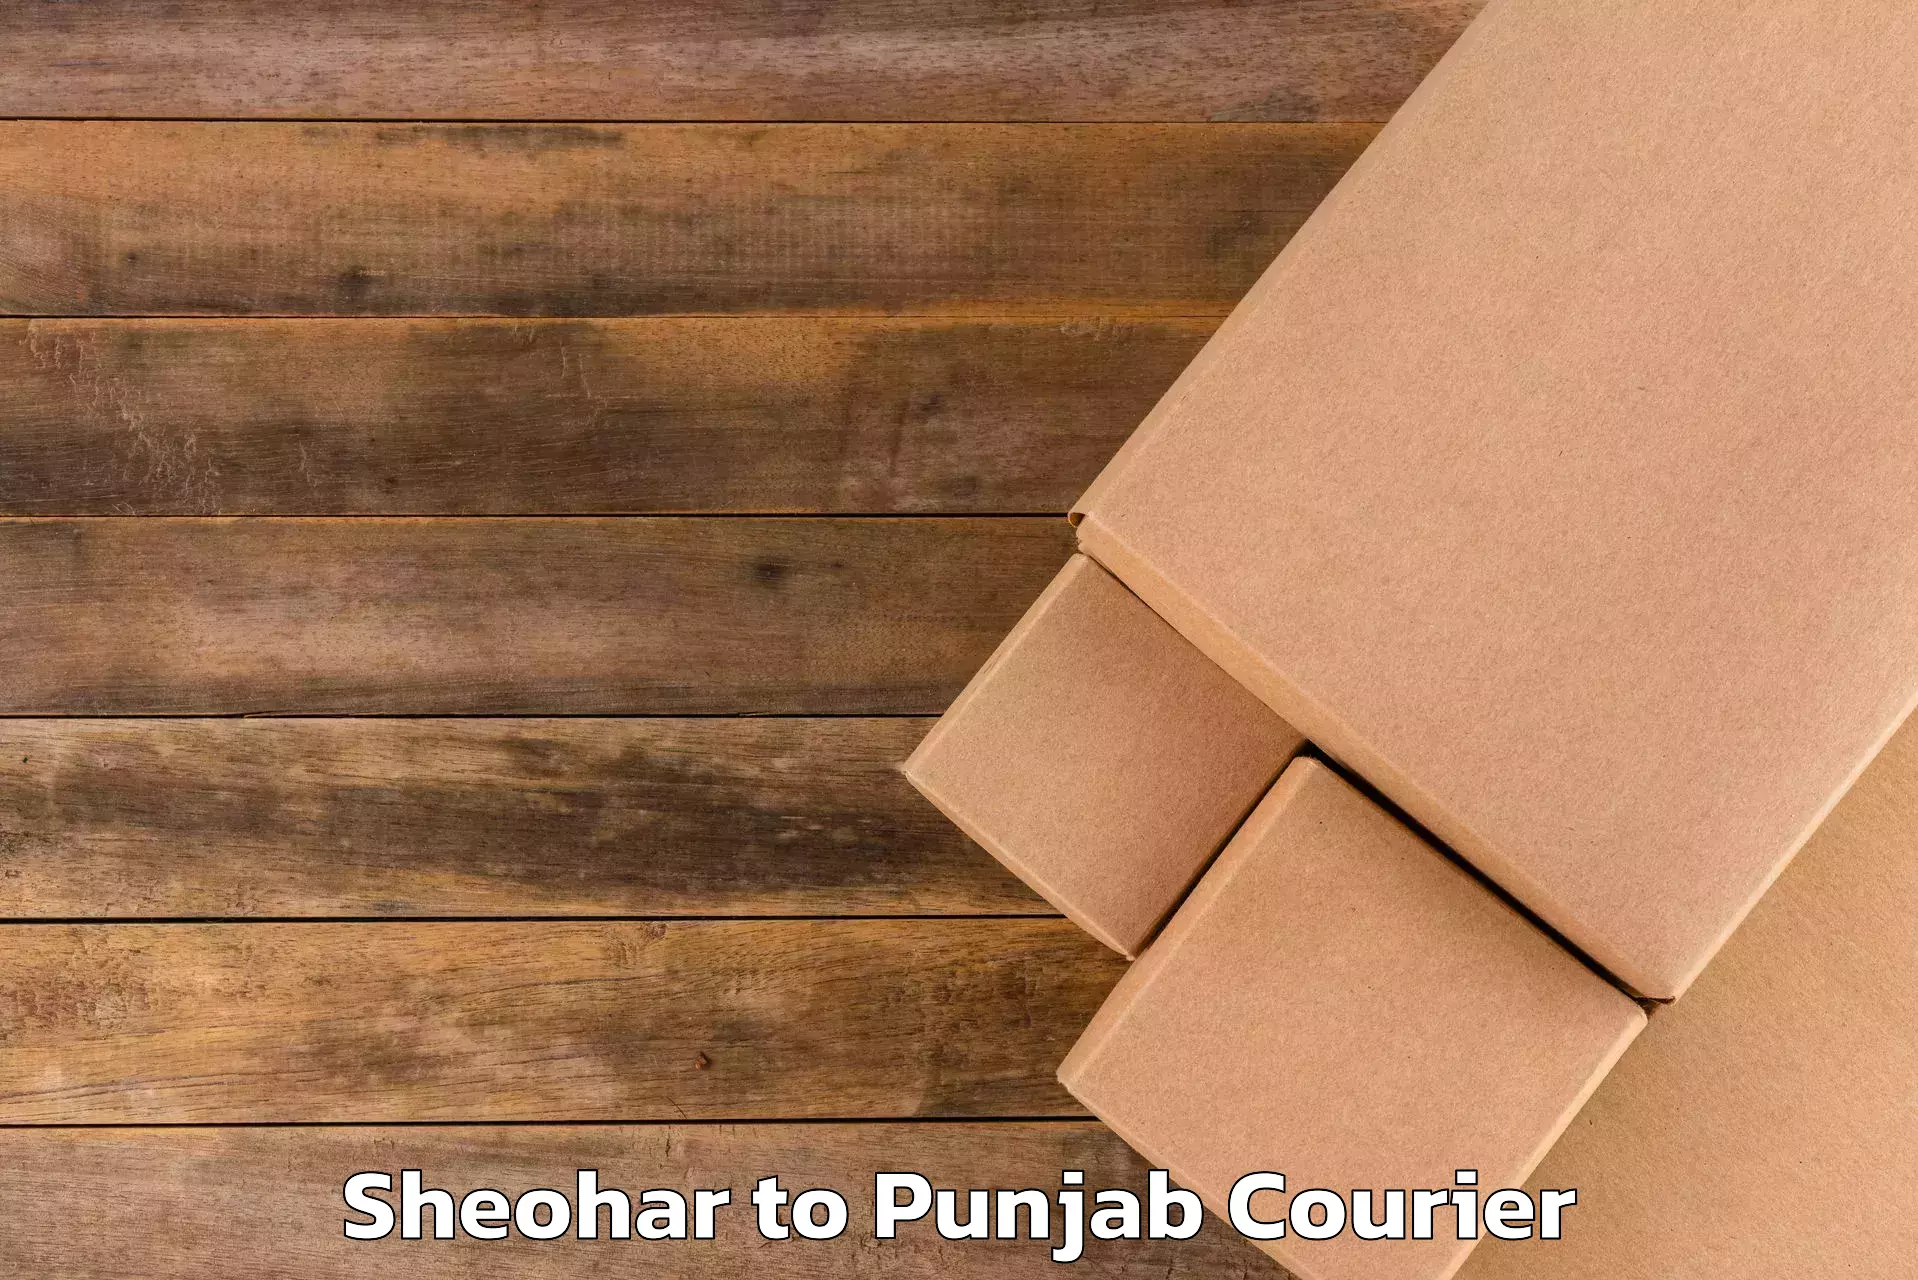 Luggage shipment specialists Sheohar to Mohali